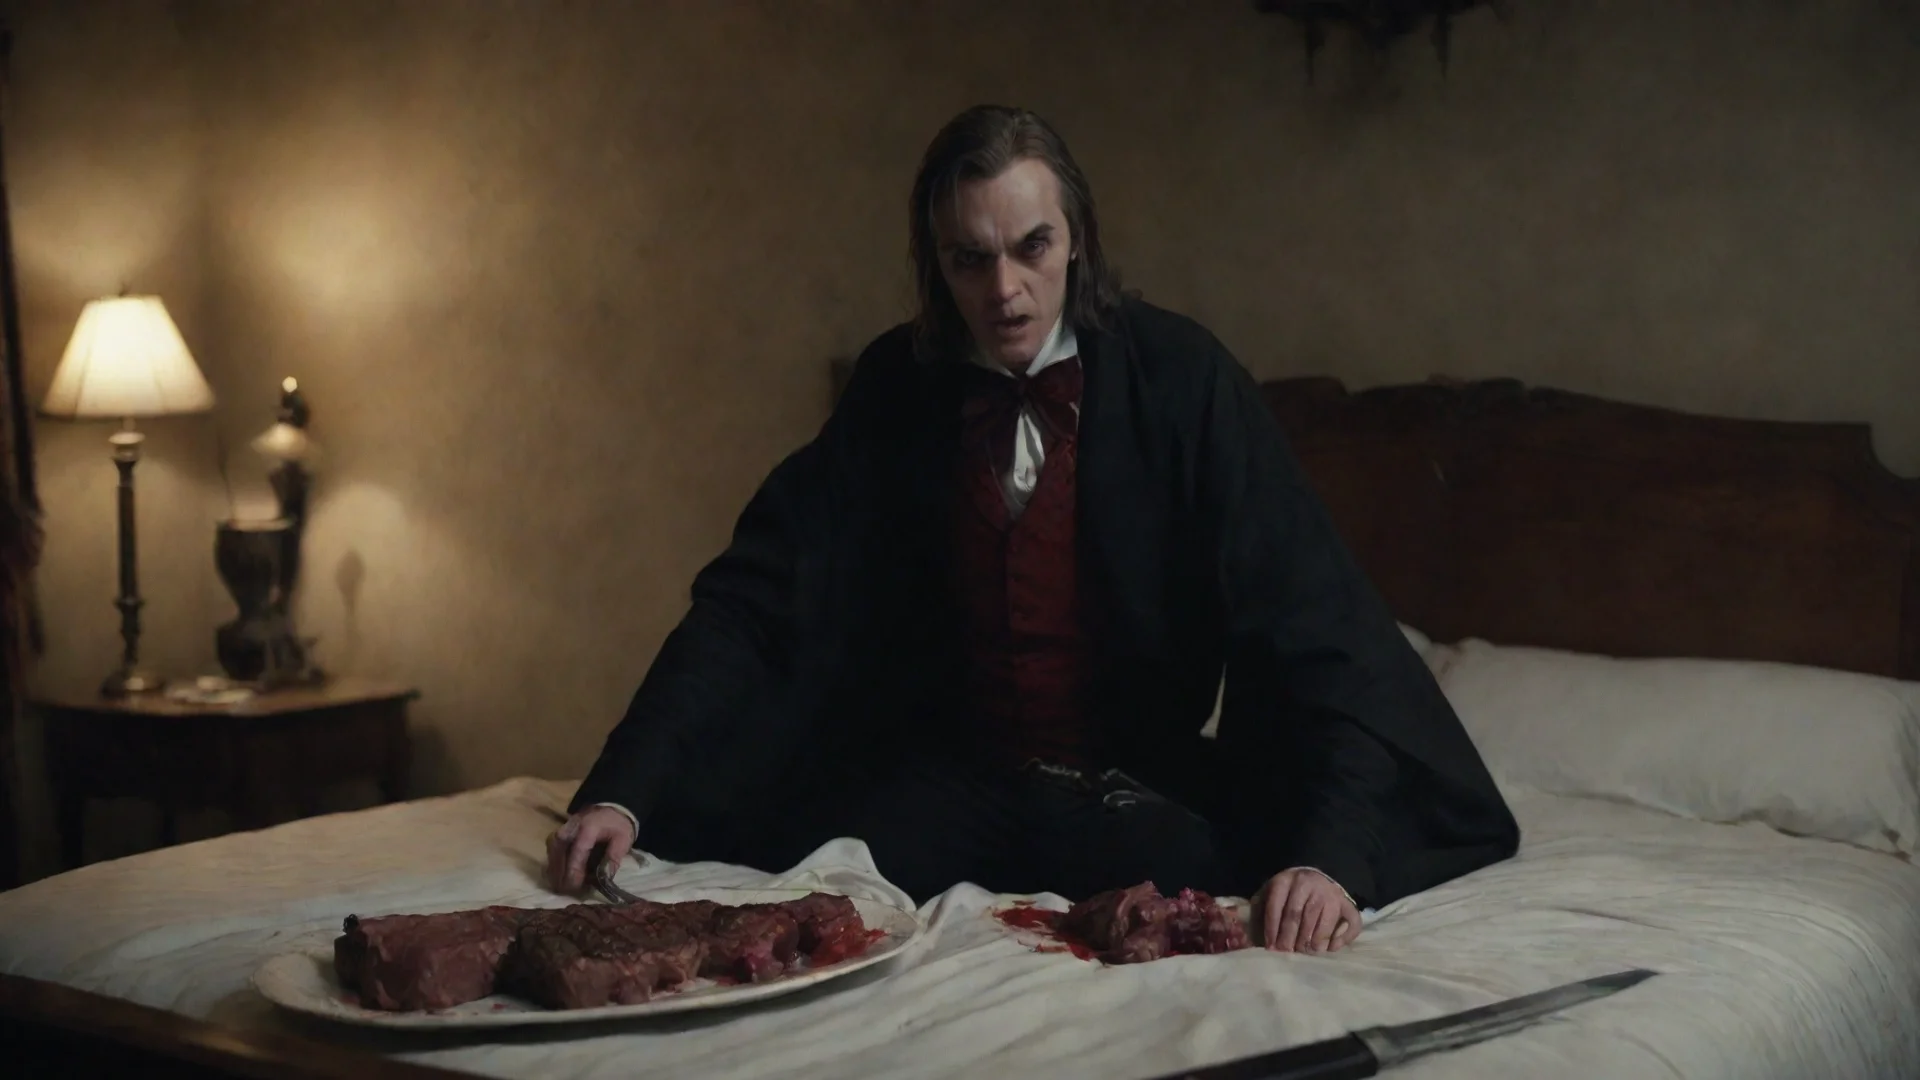 amazing vampire steak silver sword on bed 1800s spooky epic shot cinematic wow awesome portrait 2 wide